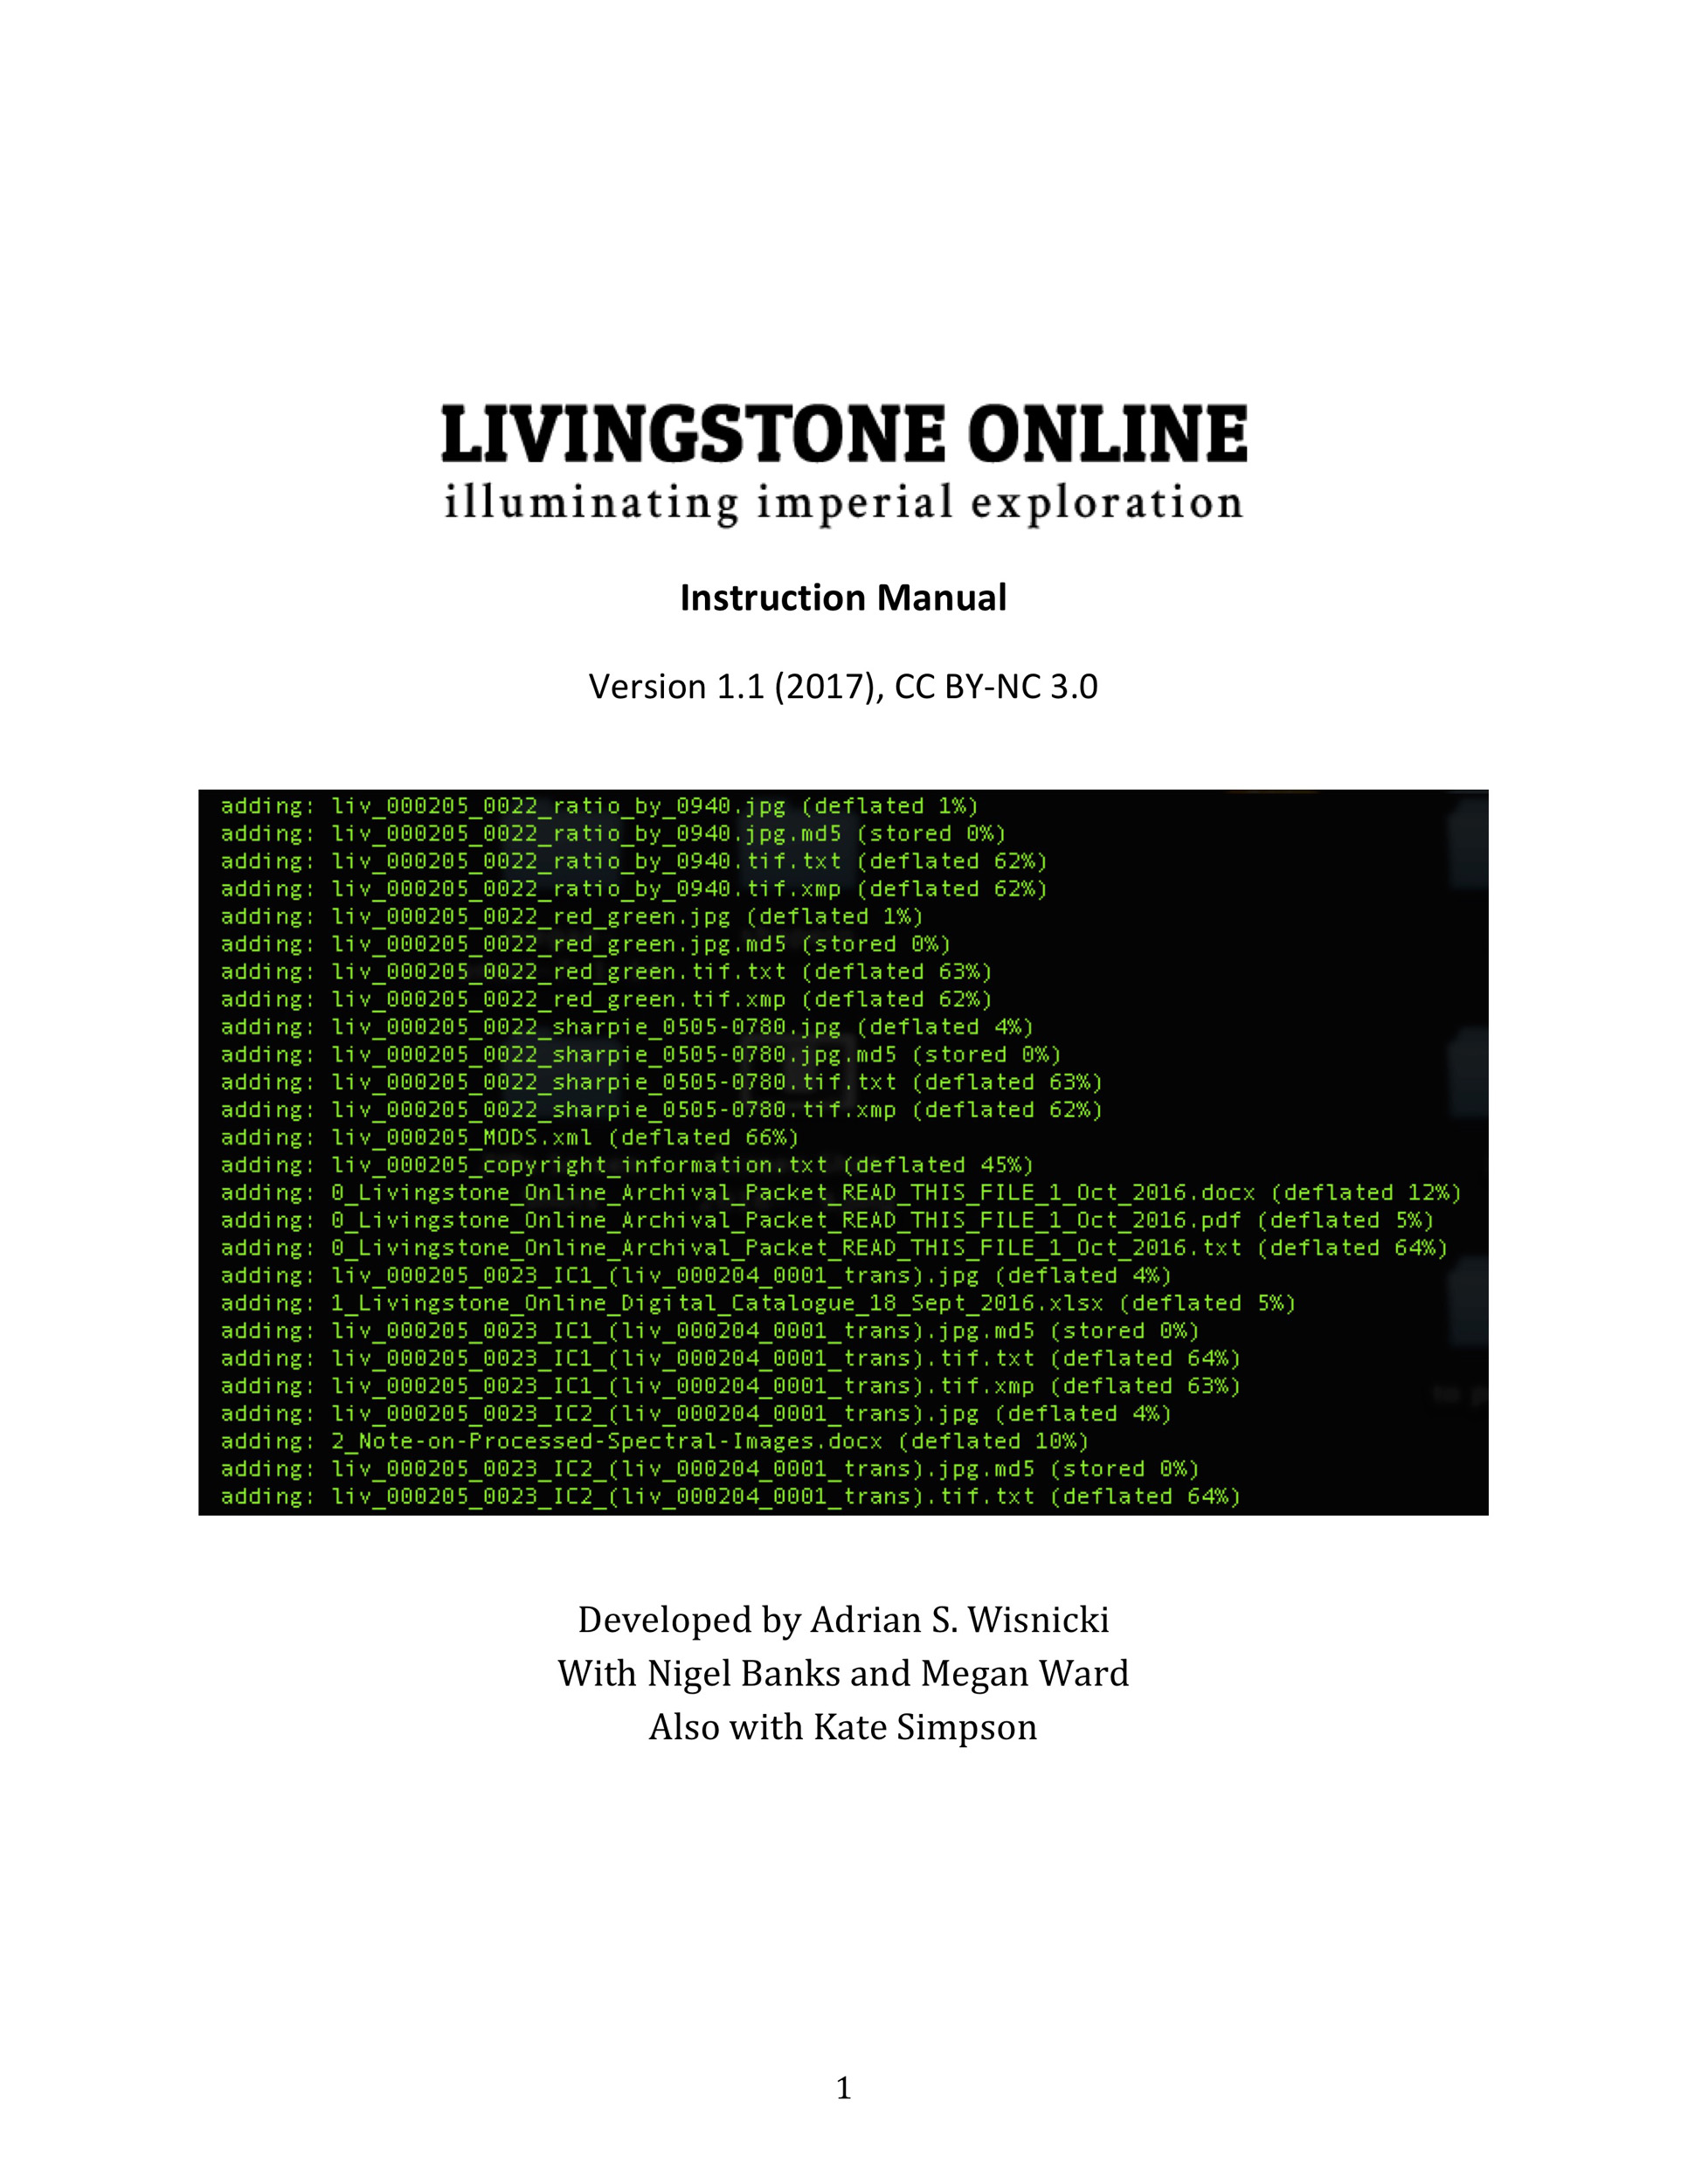 Livingstone Online Instruction Manual, cover. Copyright Livingstone Online. Creative Commons Attribution-NonCommercial 3.0 Unported (https://creativecommons.org/licenses/by-nc/3.0/).